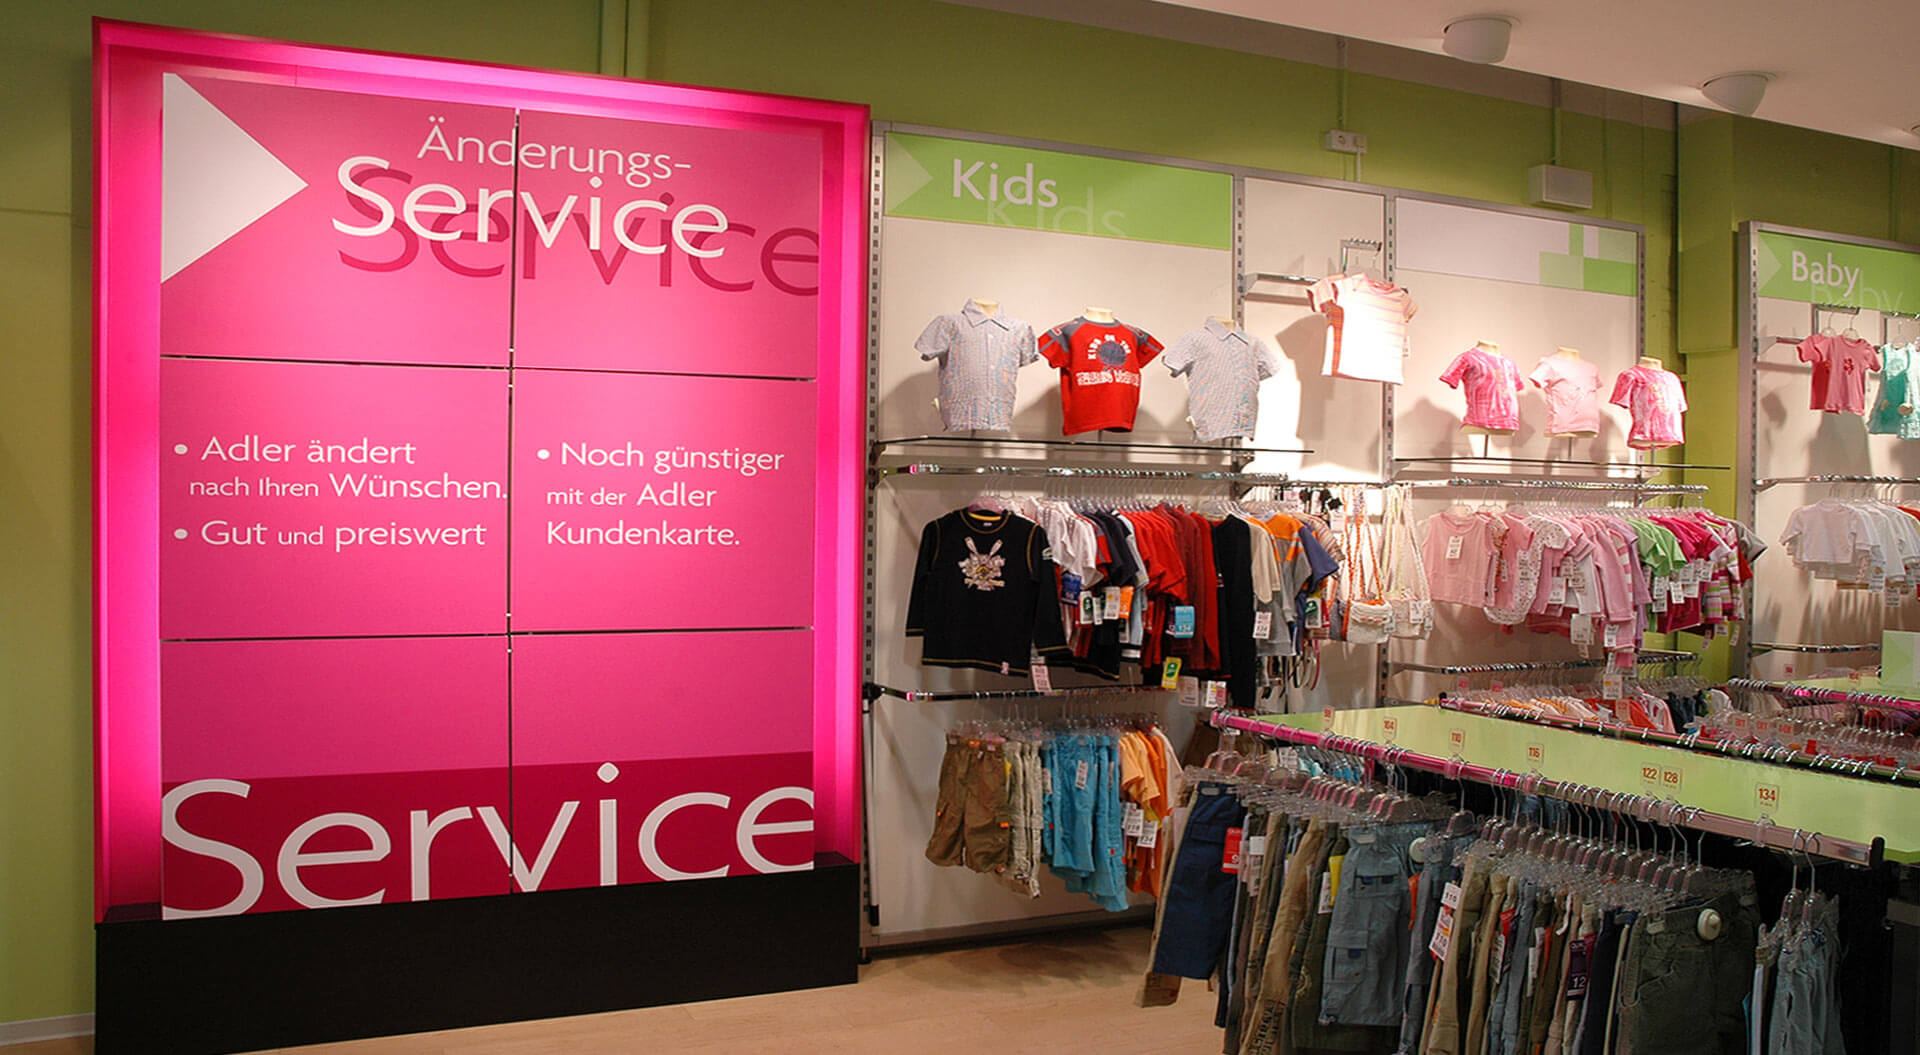  Adler Fashion Store Germany best retail store design, rebrand and merchandising Service and childrens wear department